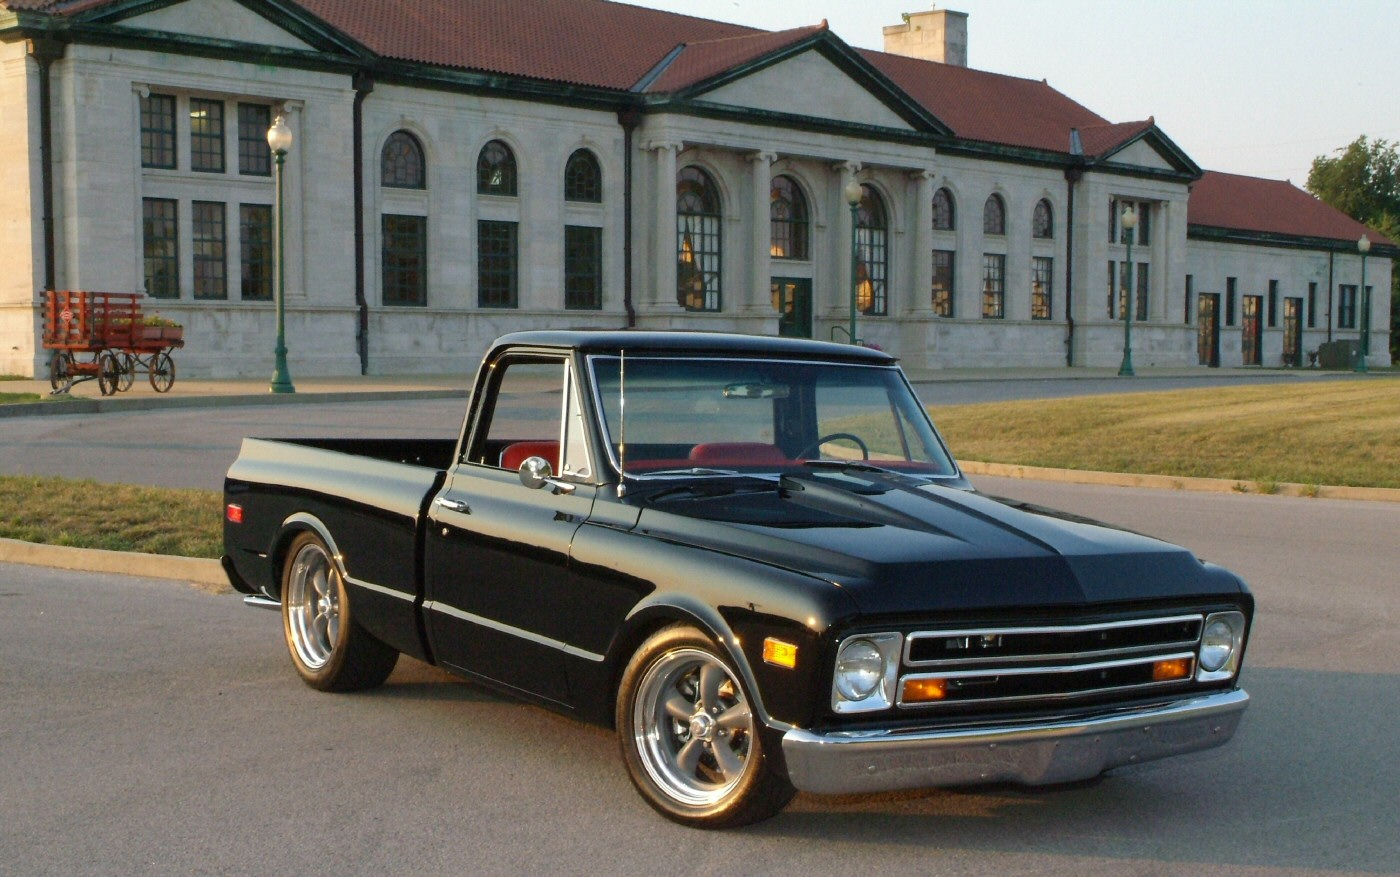 A picture of a 1971 c10 Chevy pickup.